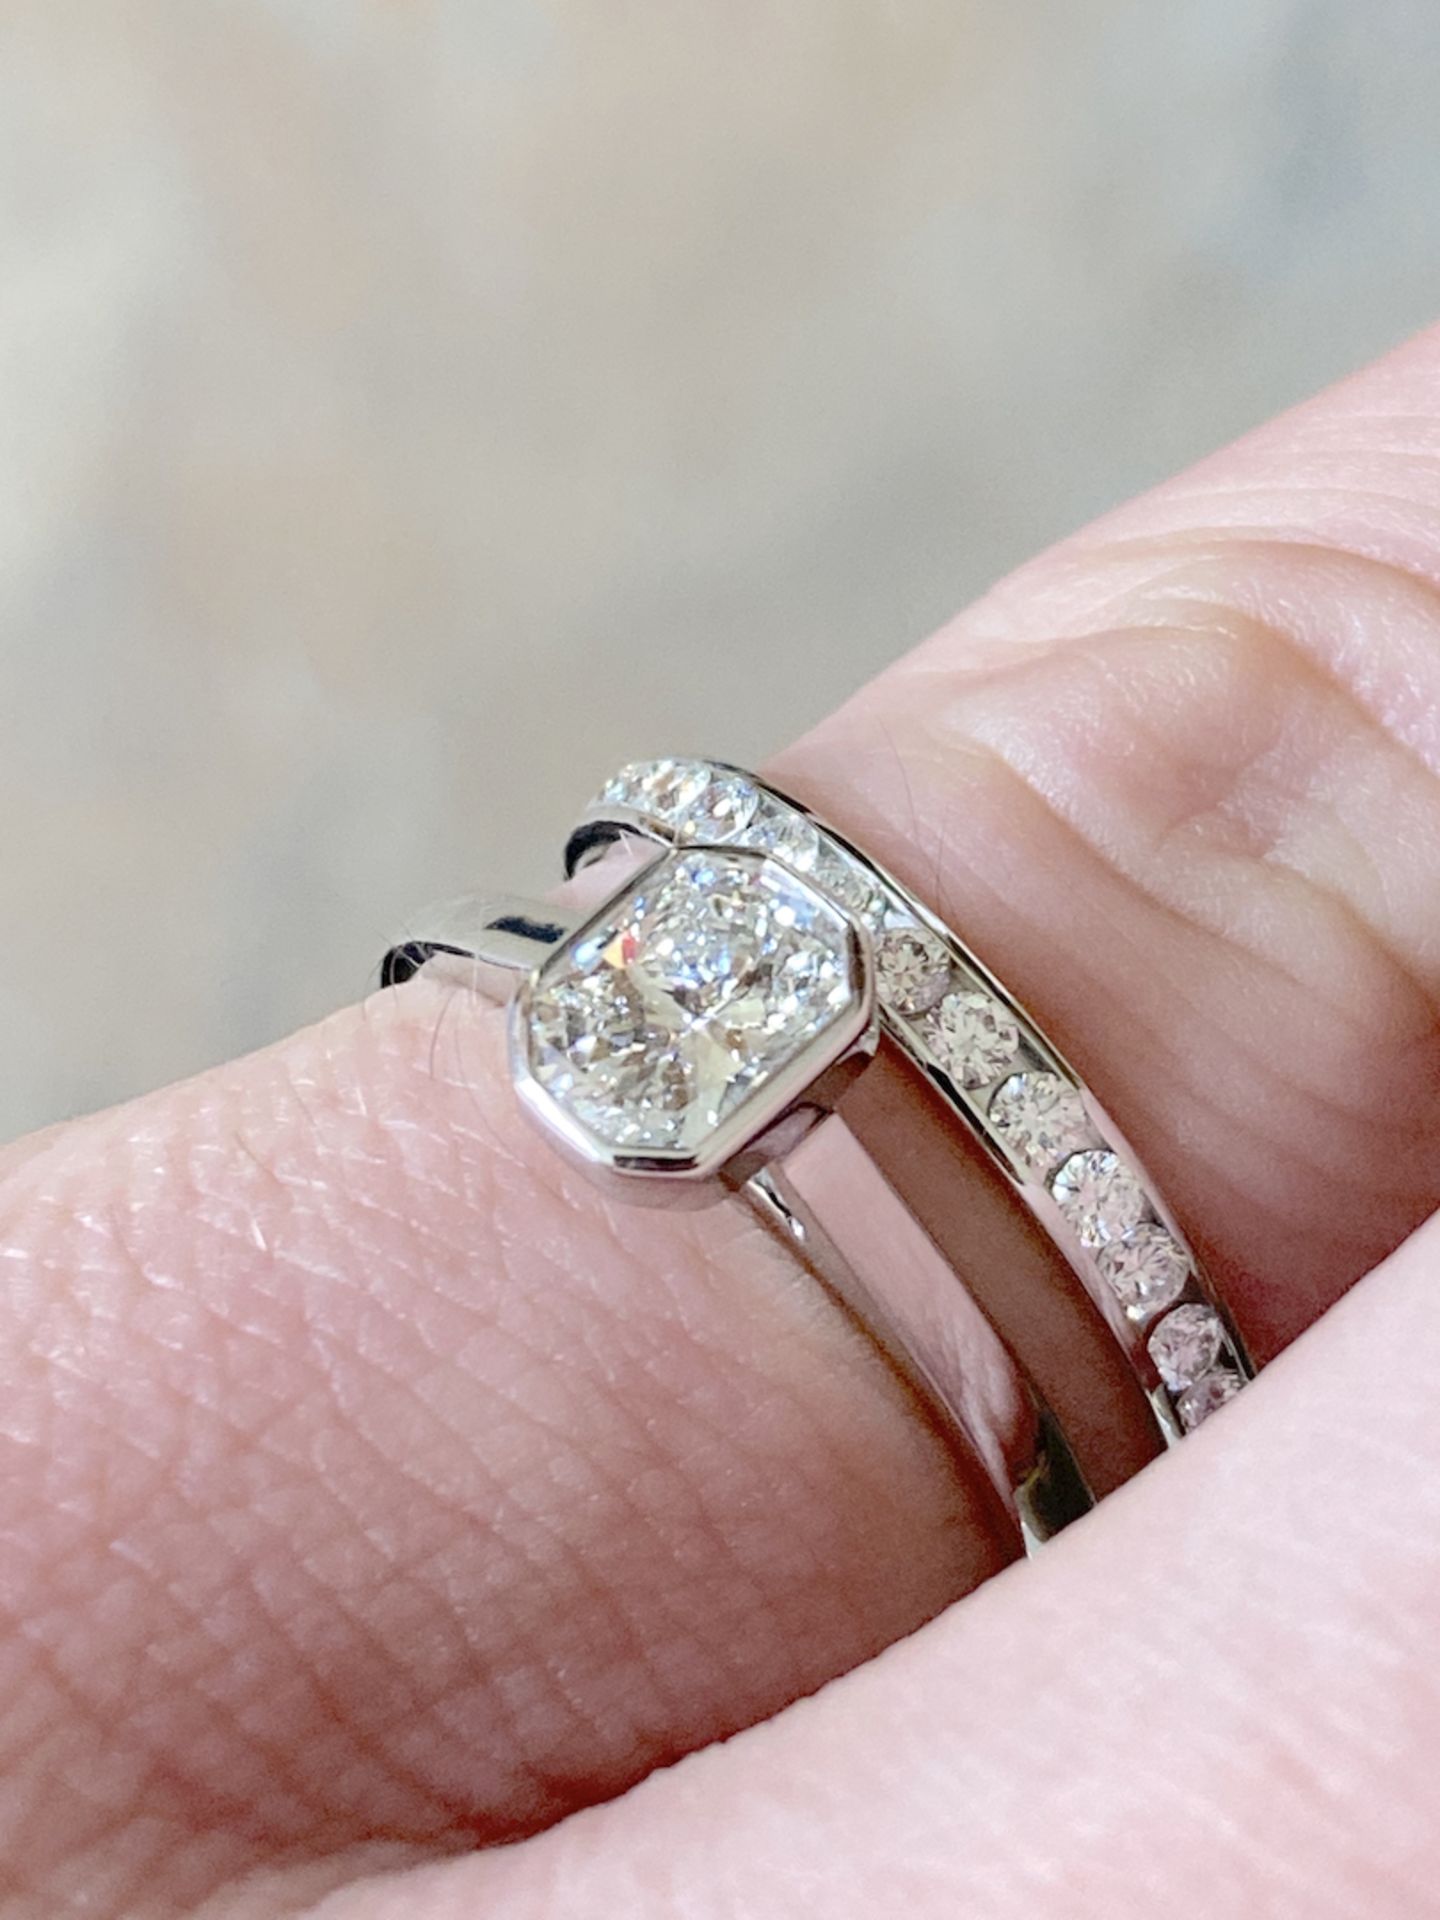 Beautiful Platinum Diamond Ring Set - Solitaire (VVS1) & Band Over 1ct Total (£7,937 Valuation) - Image 15 of 32